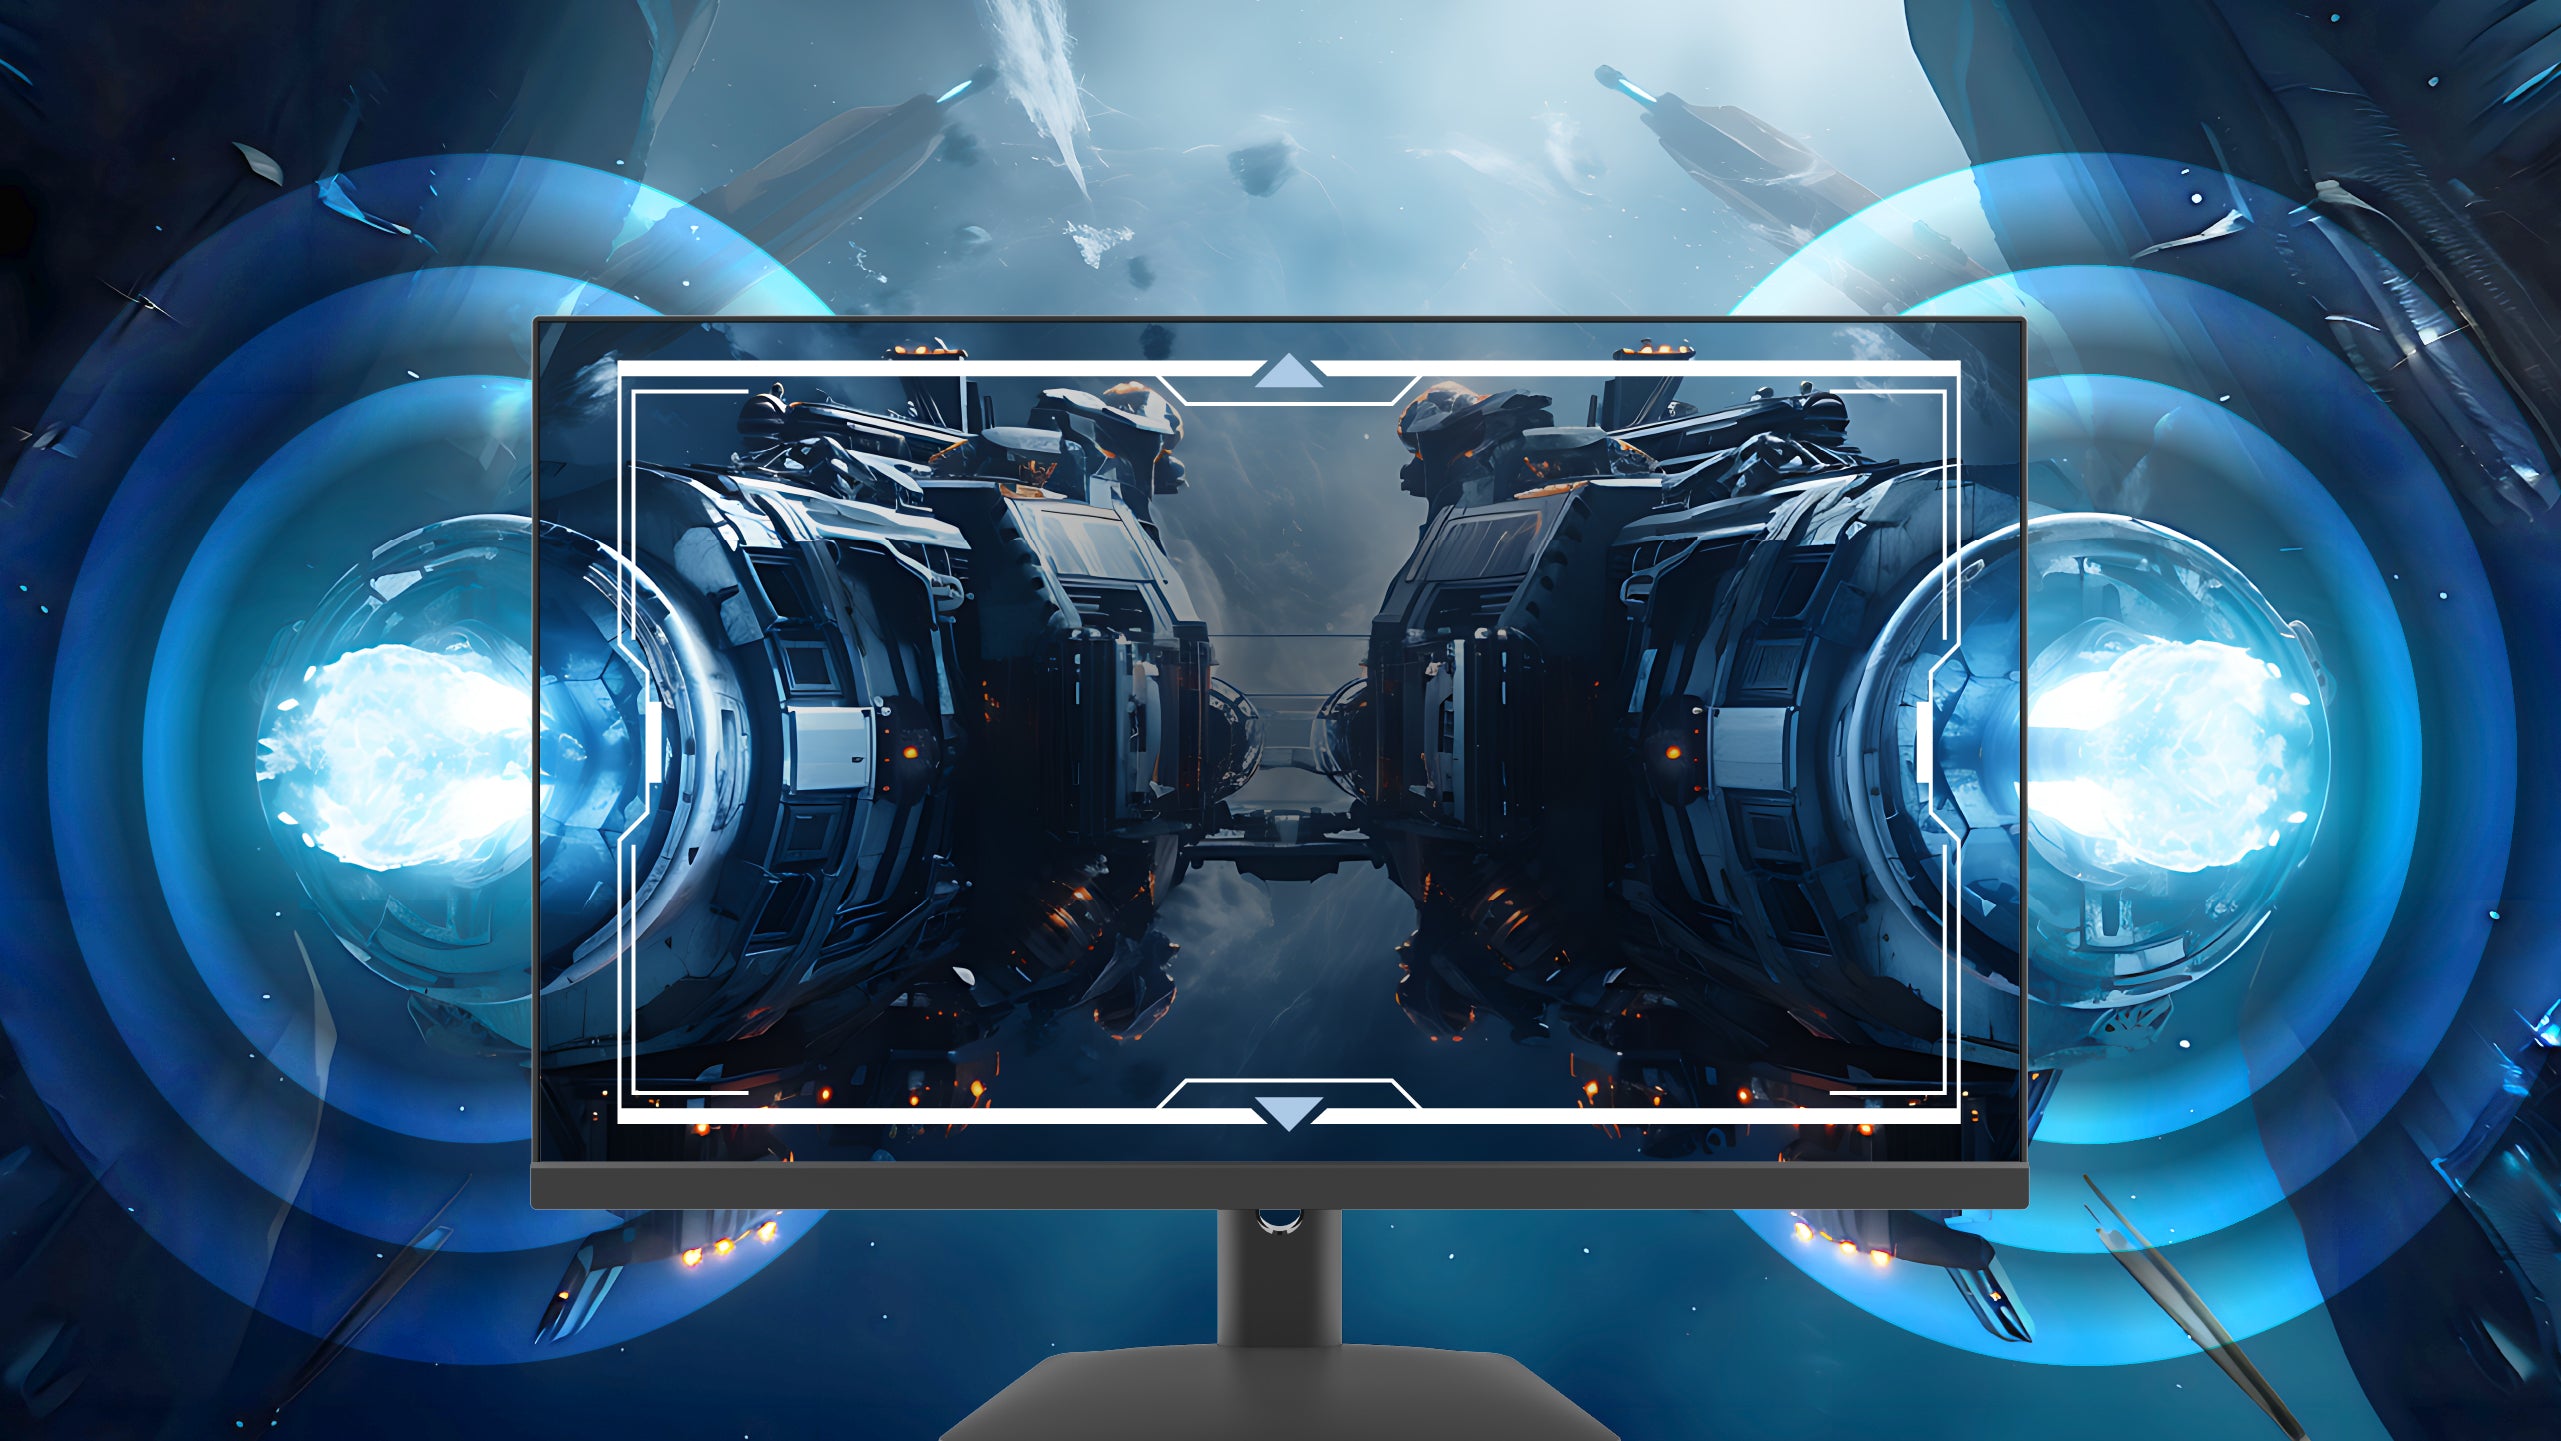 A 24-inch IPS Minifire X5G Gaming Monitor with built-in speakers displays sound effects